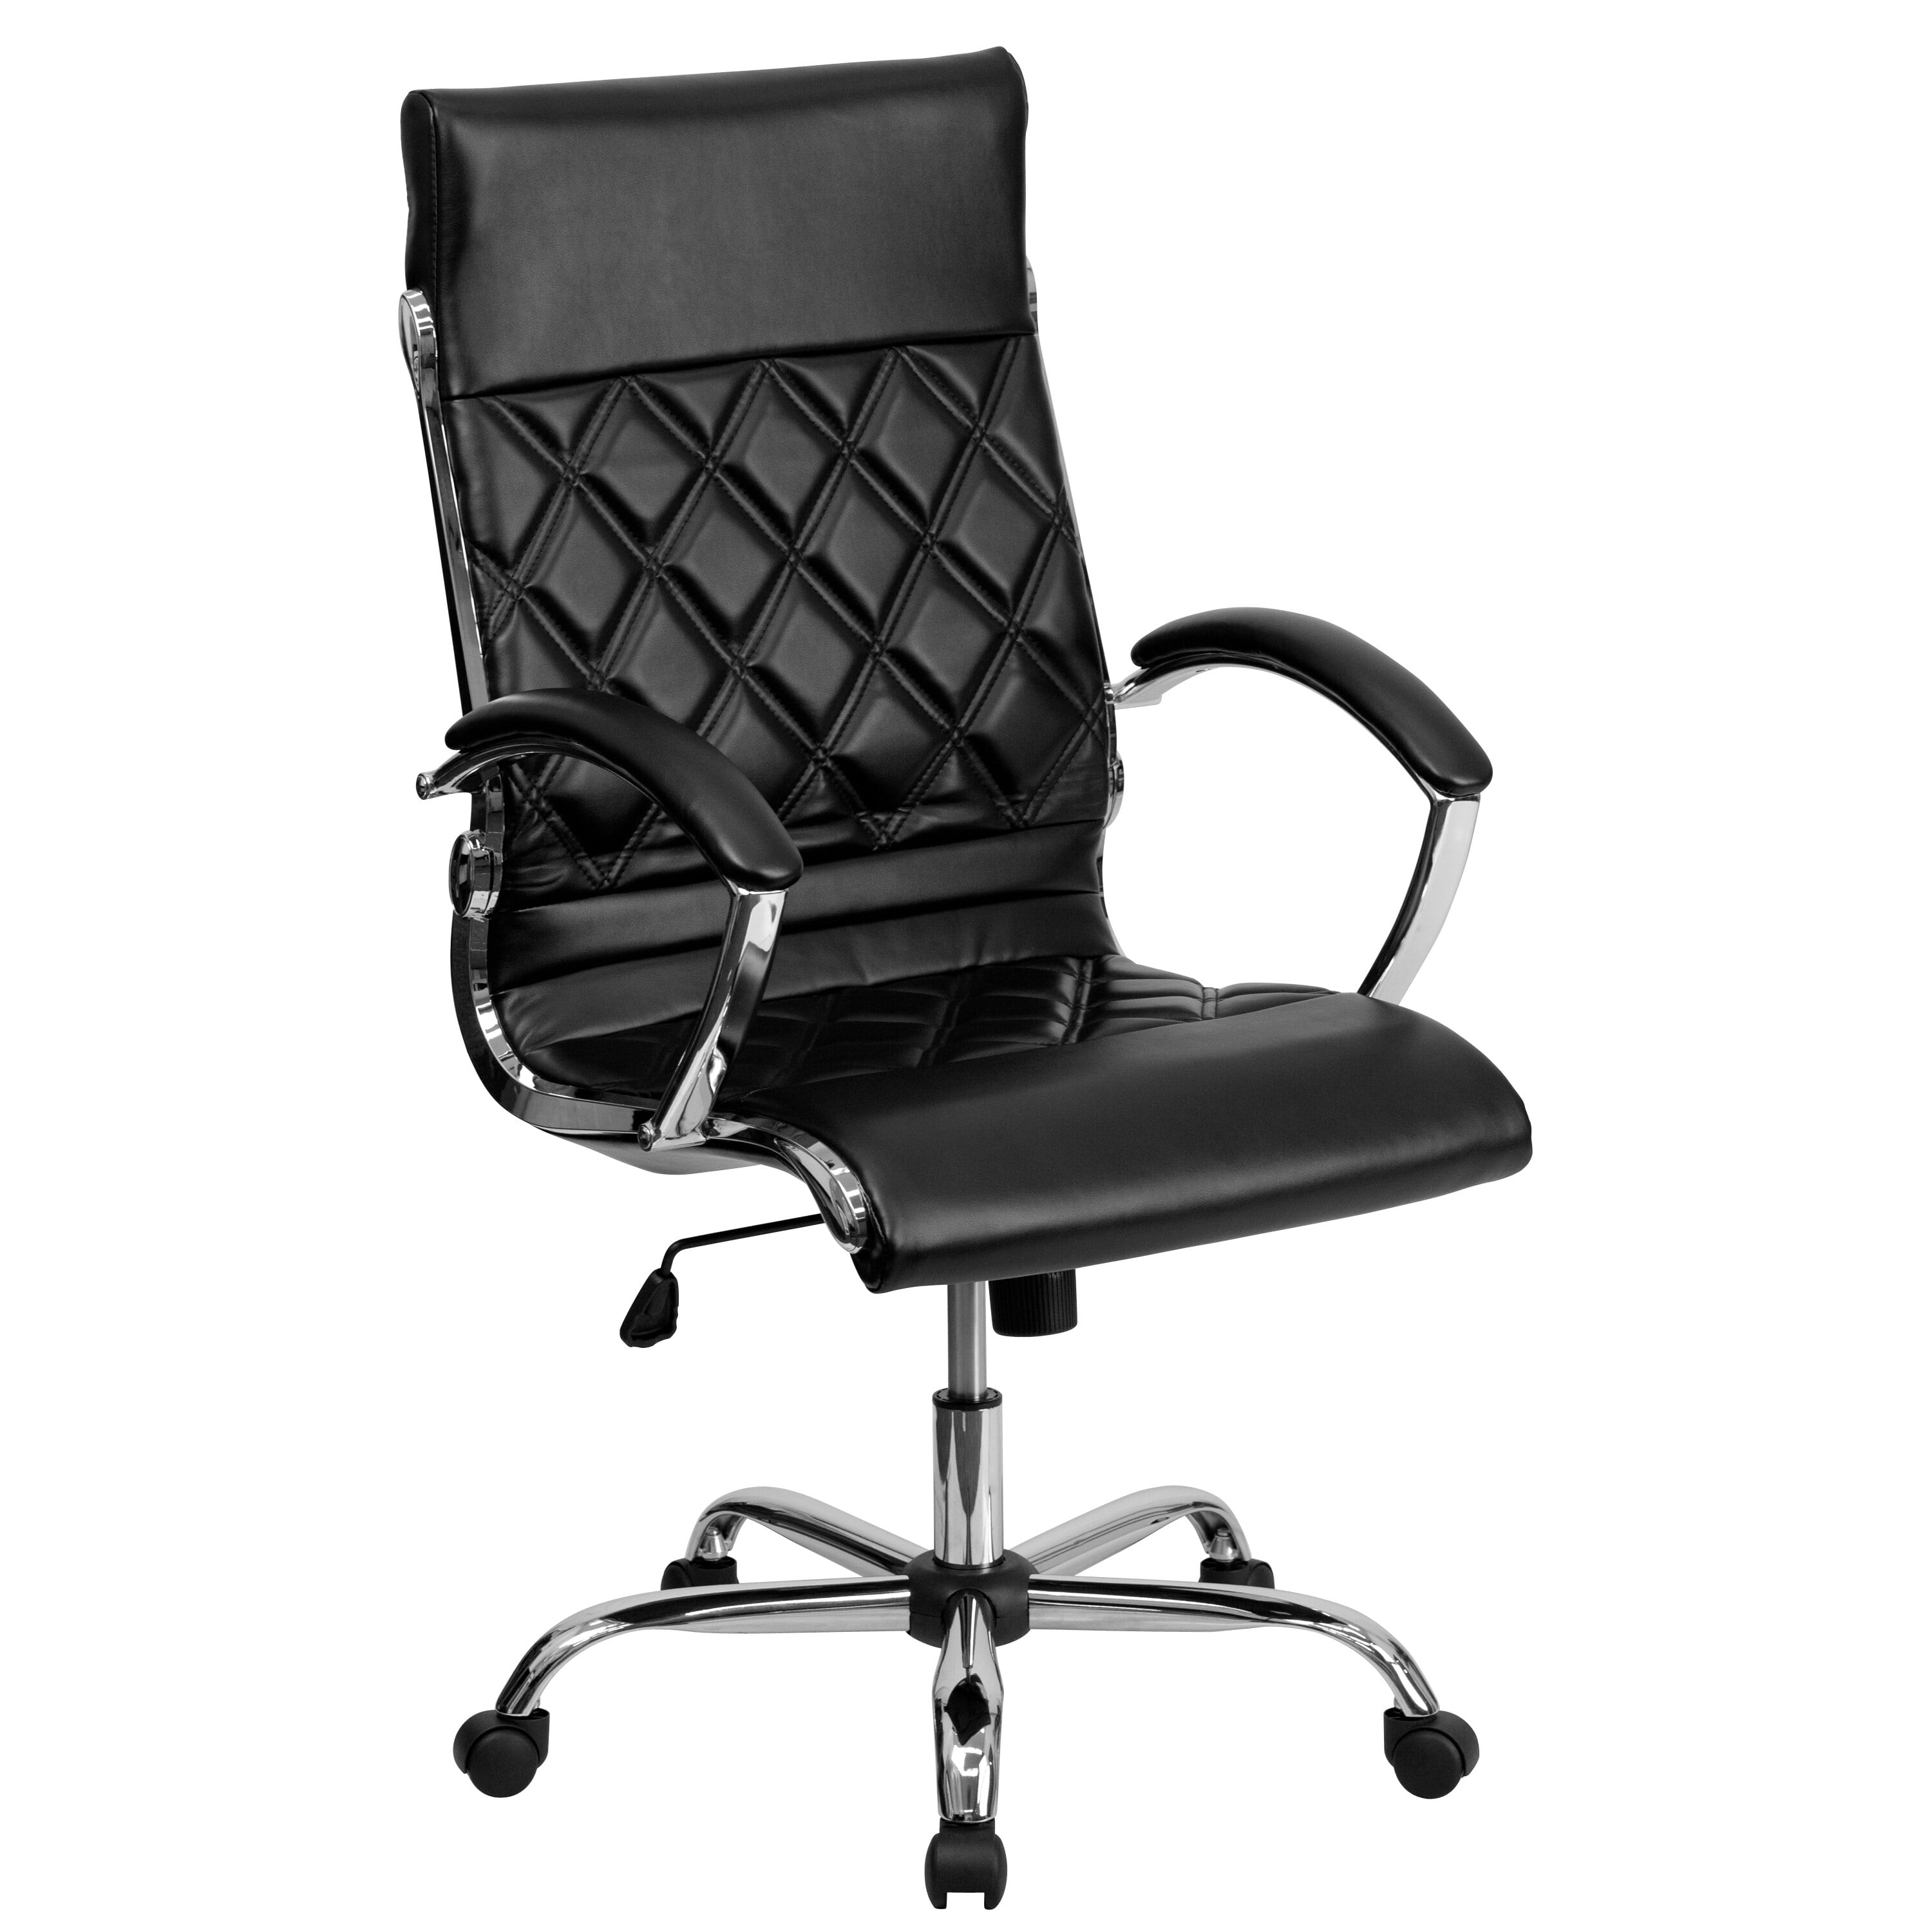 Proform® Diamond Accented Stitch Executive Chair with Genuine Top Grain  Leather